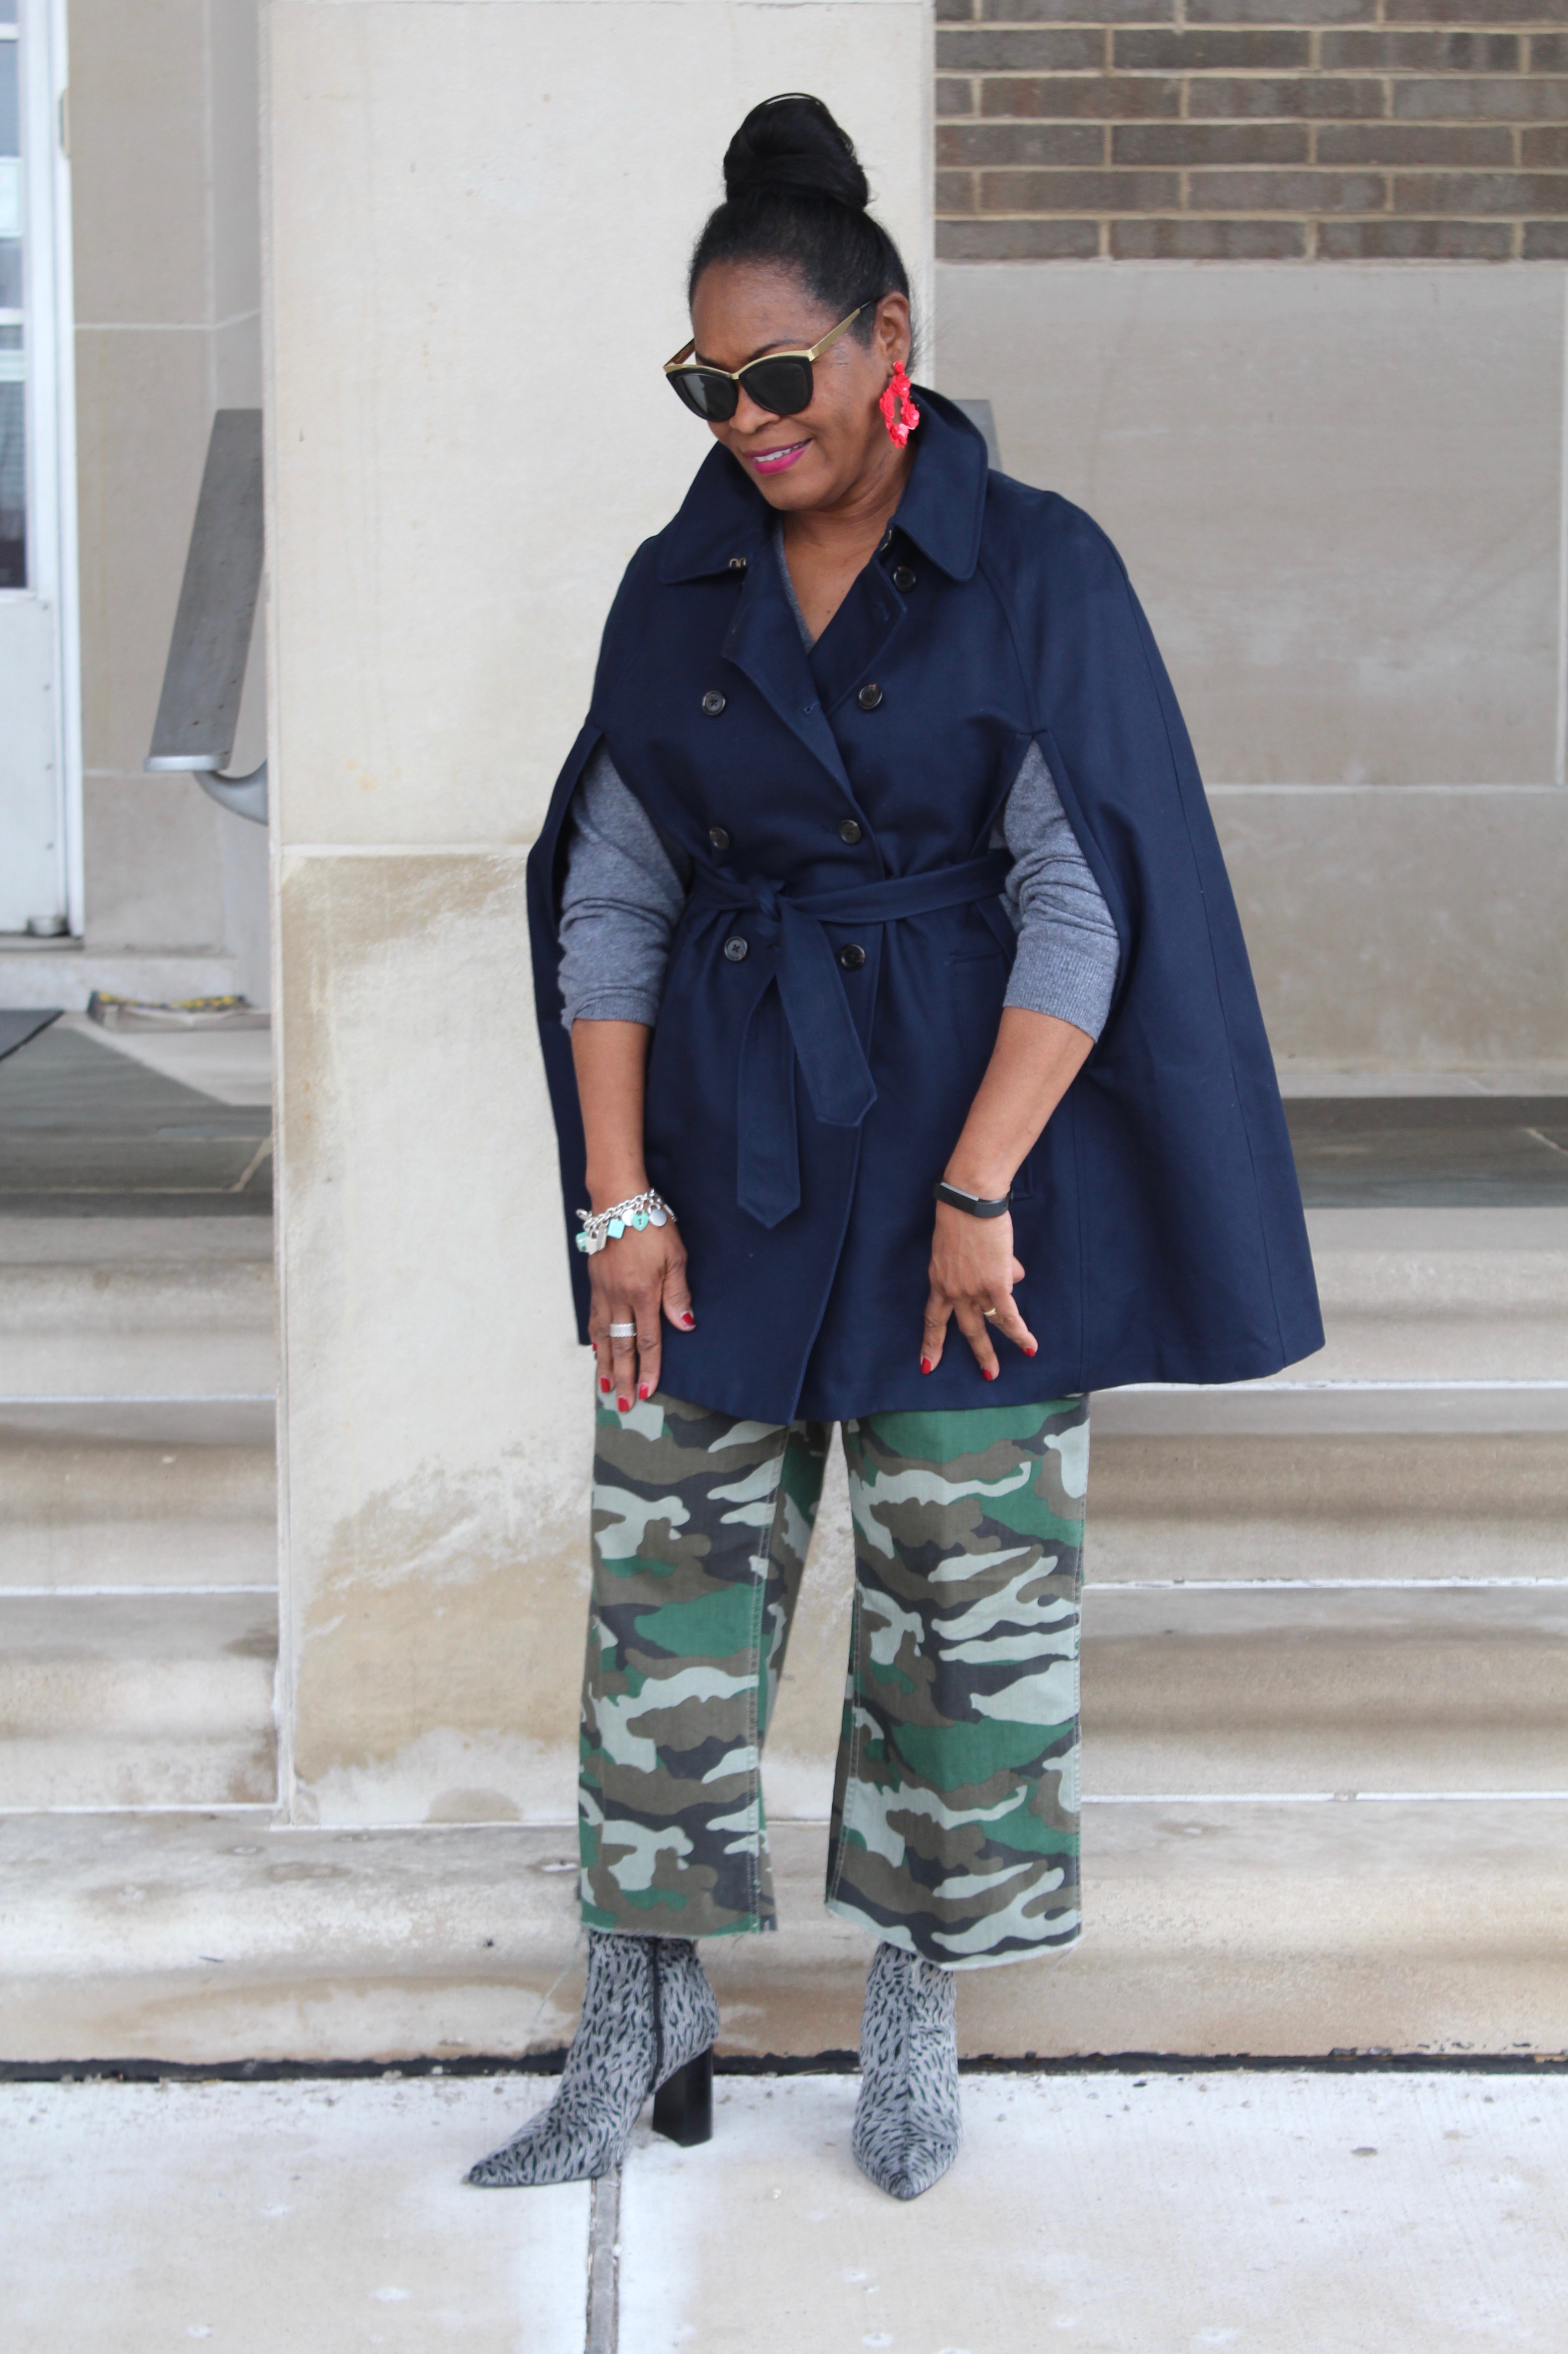 Difference Between Cold and Flu; J.Crew Trench Cape with J.Crew Camouflage Foundry Pant